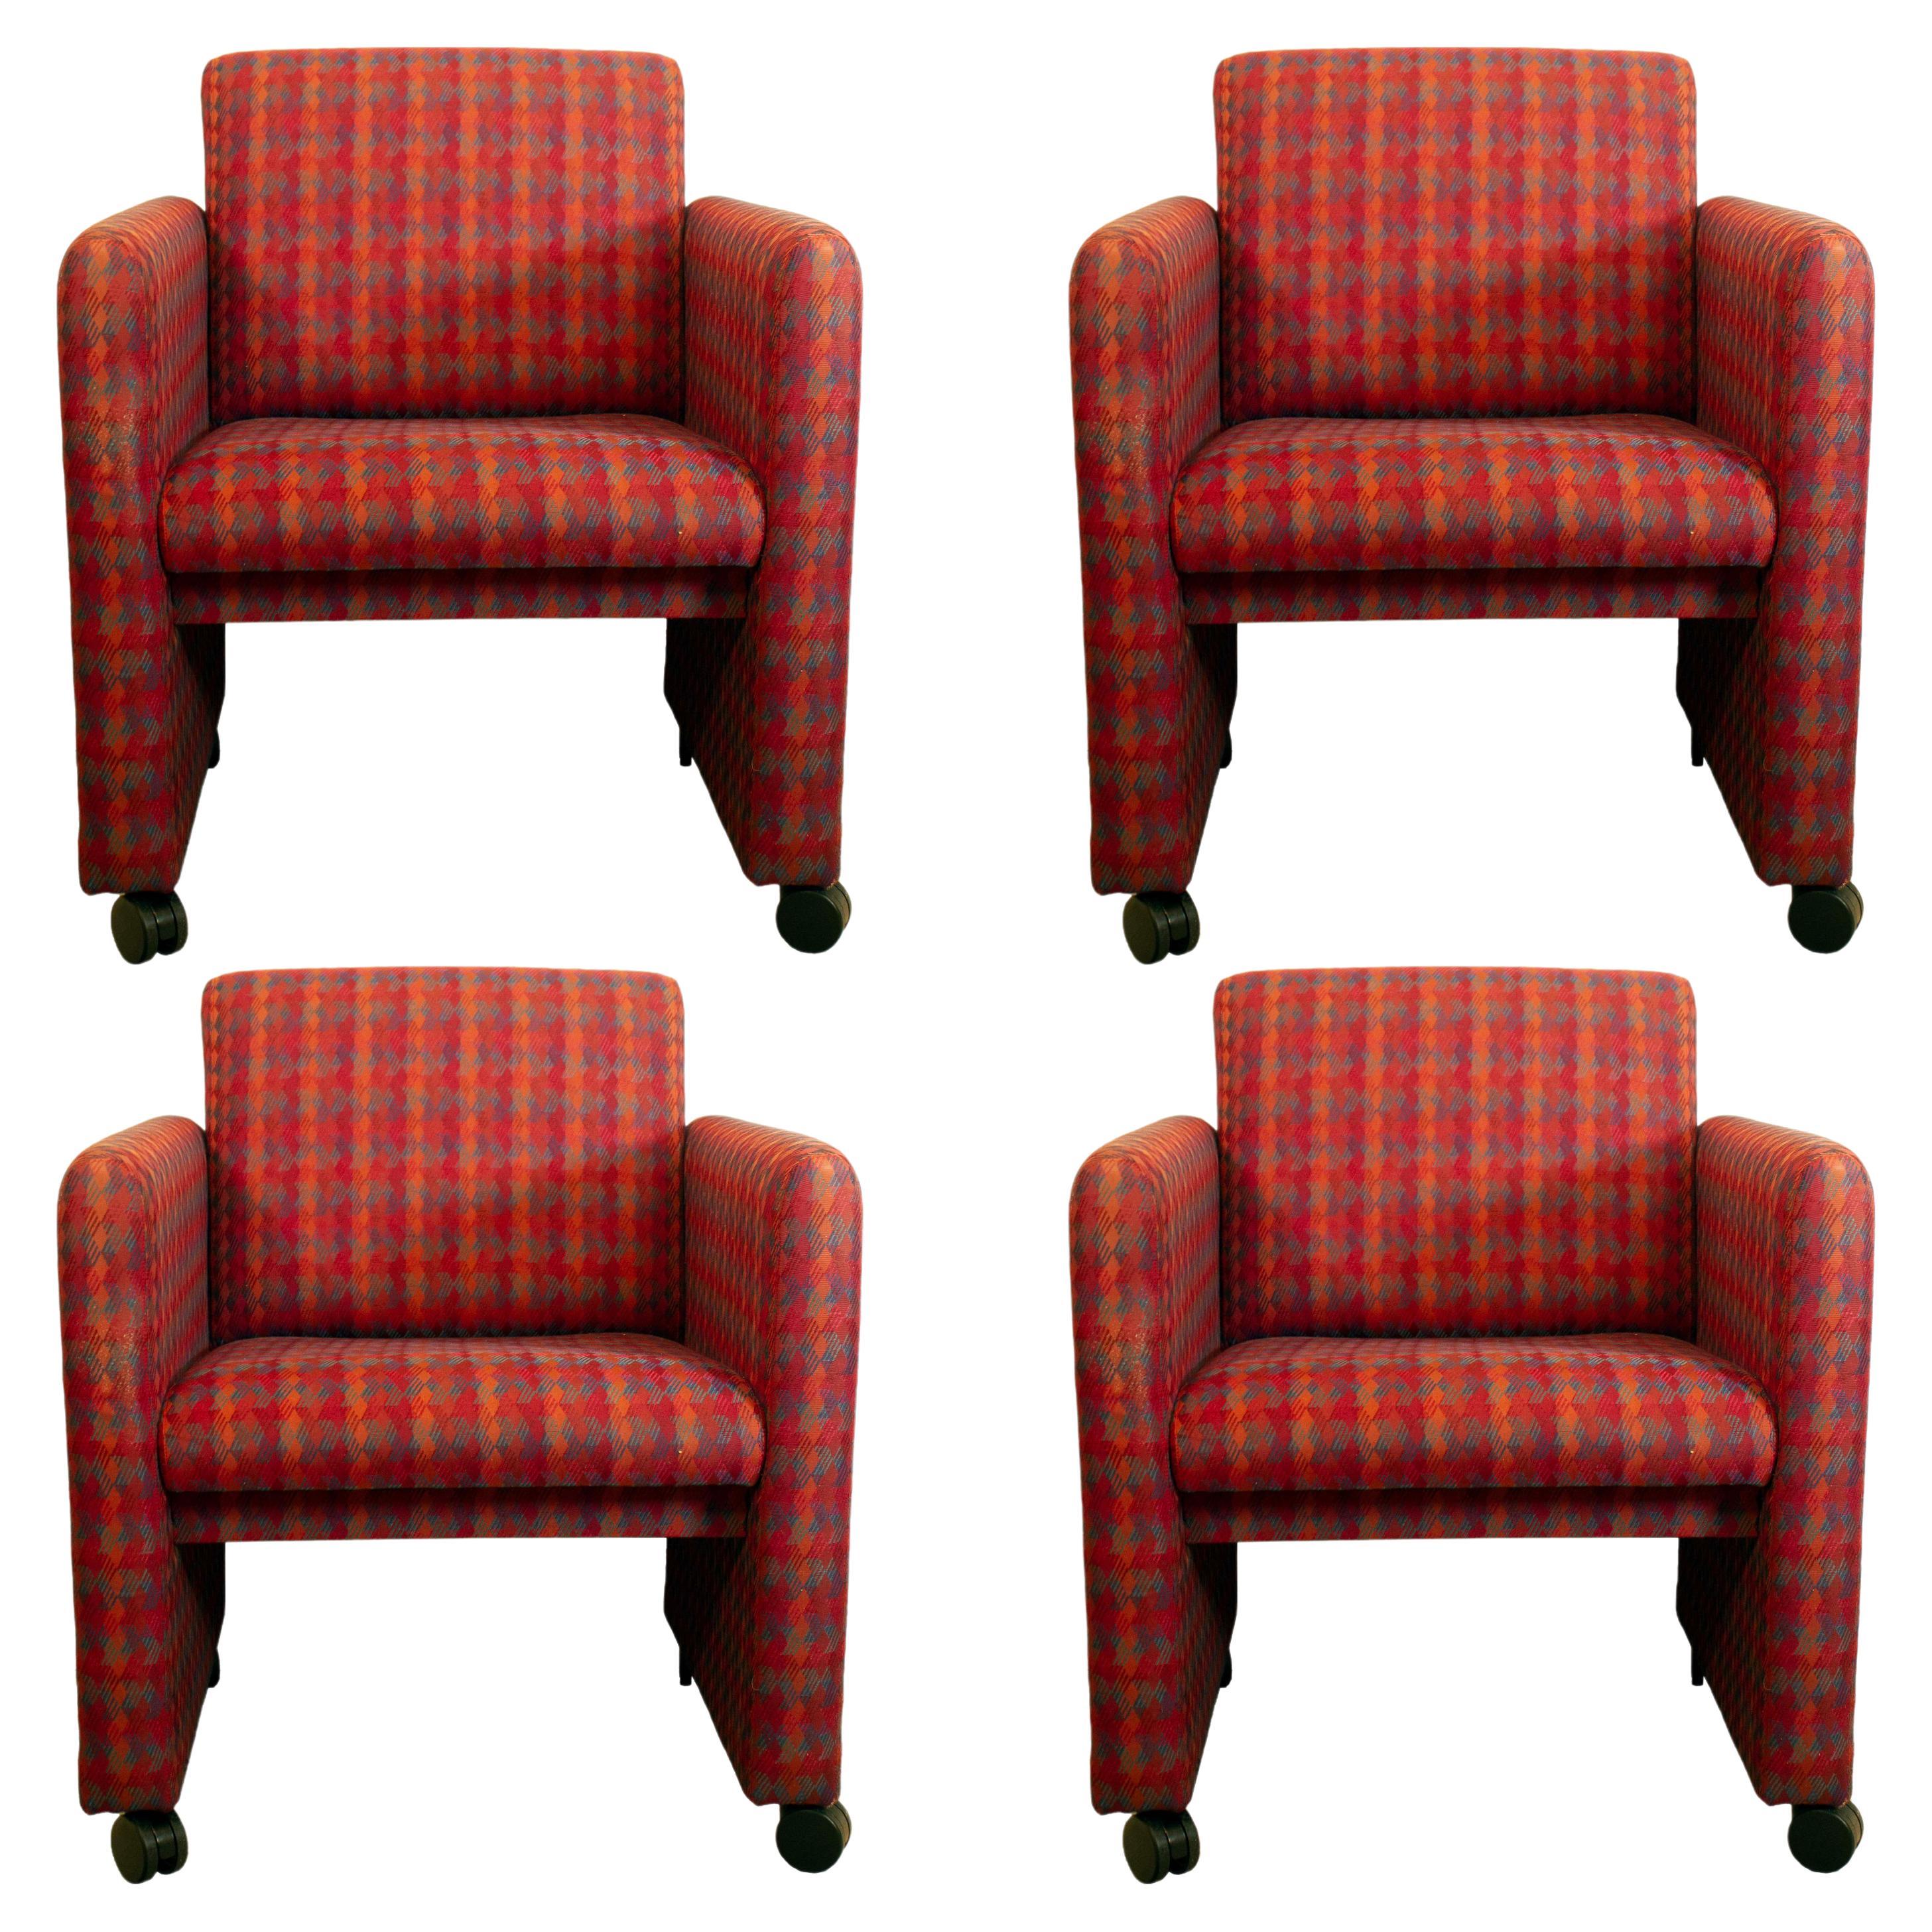 Contemporary TriMark Tulip Set of 4 Club Chairs on Casters, 1980s